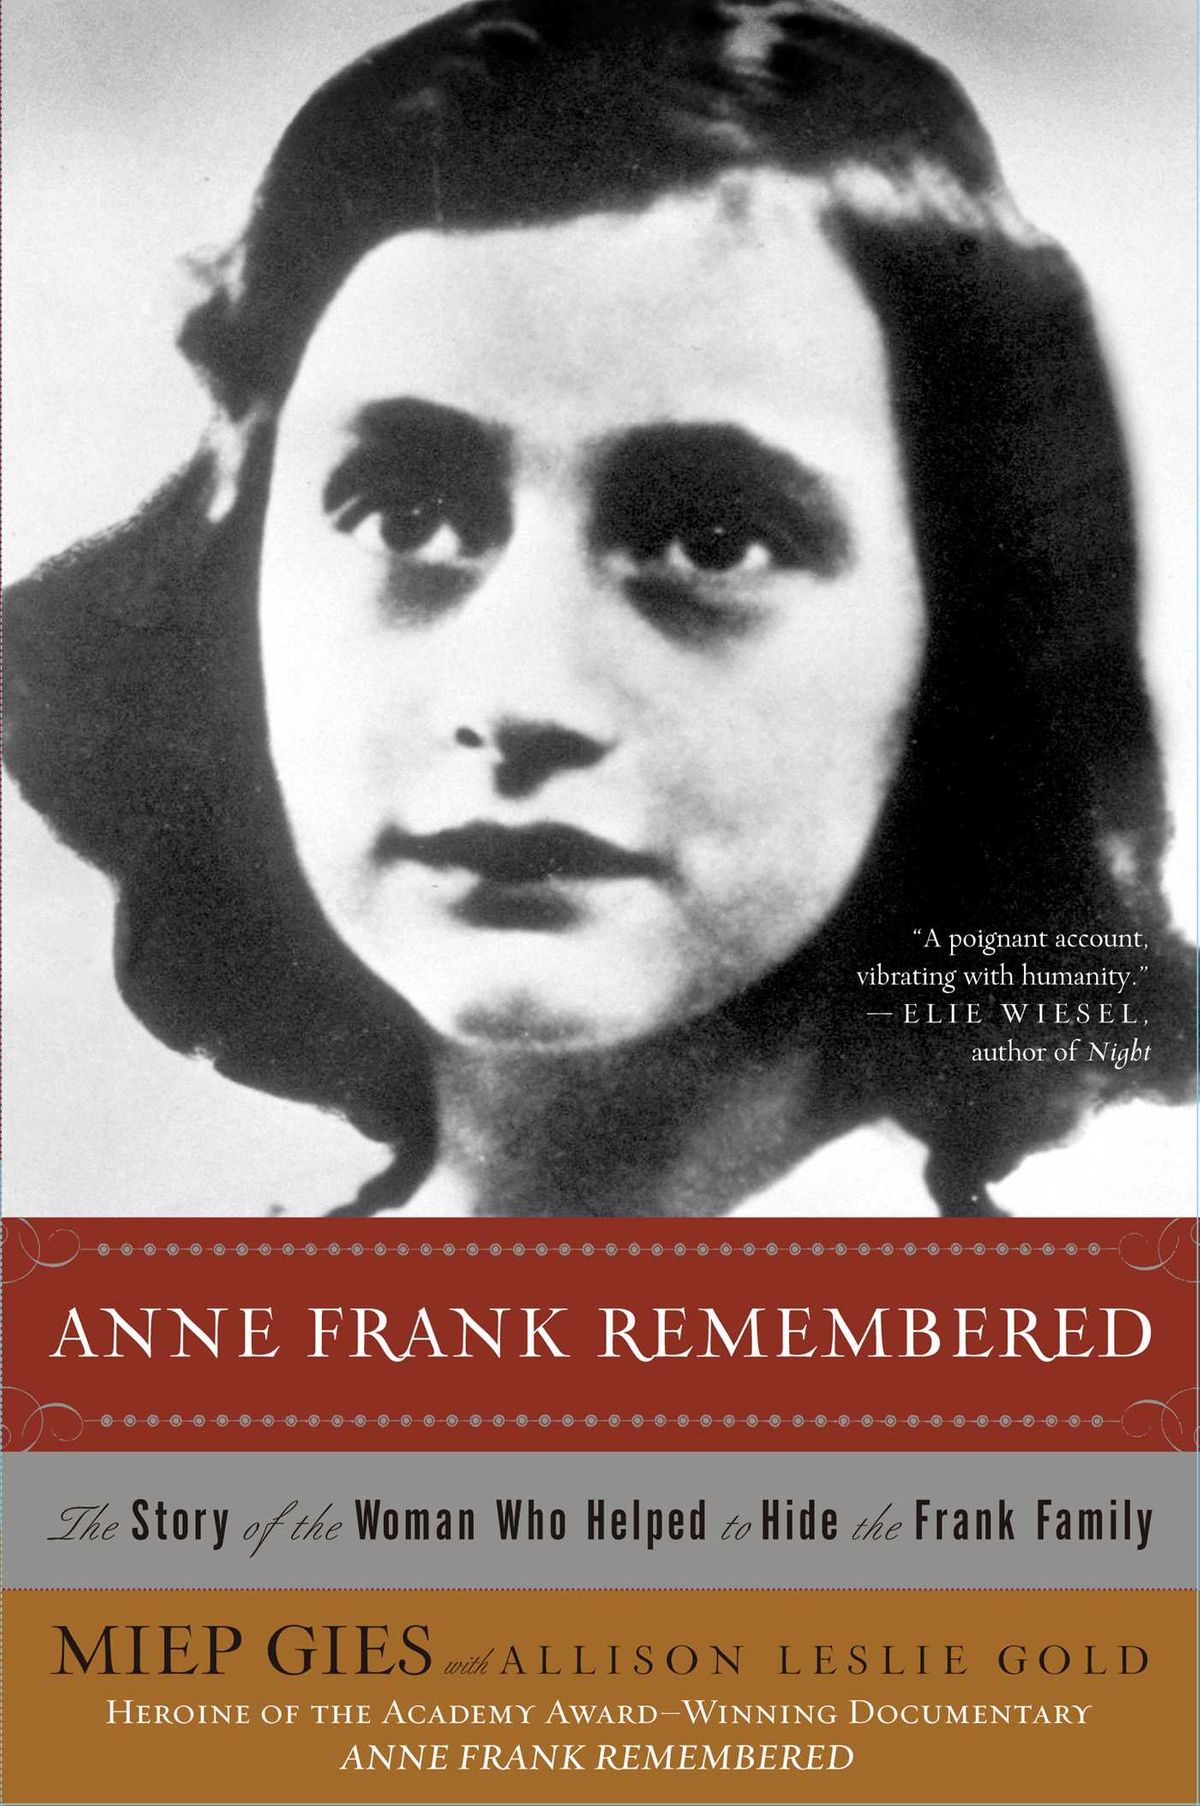 Image for "Anne Frank Remembered"